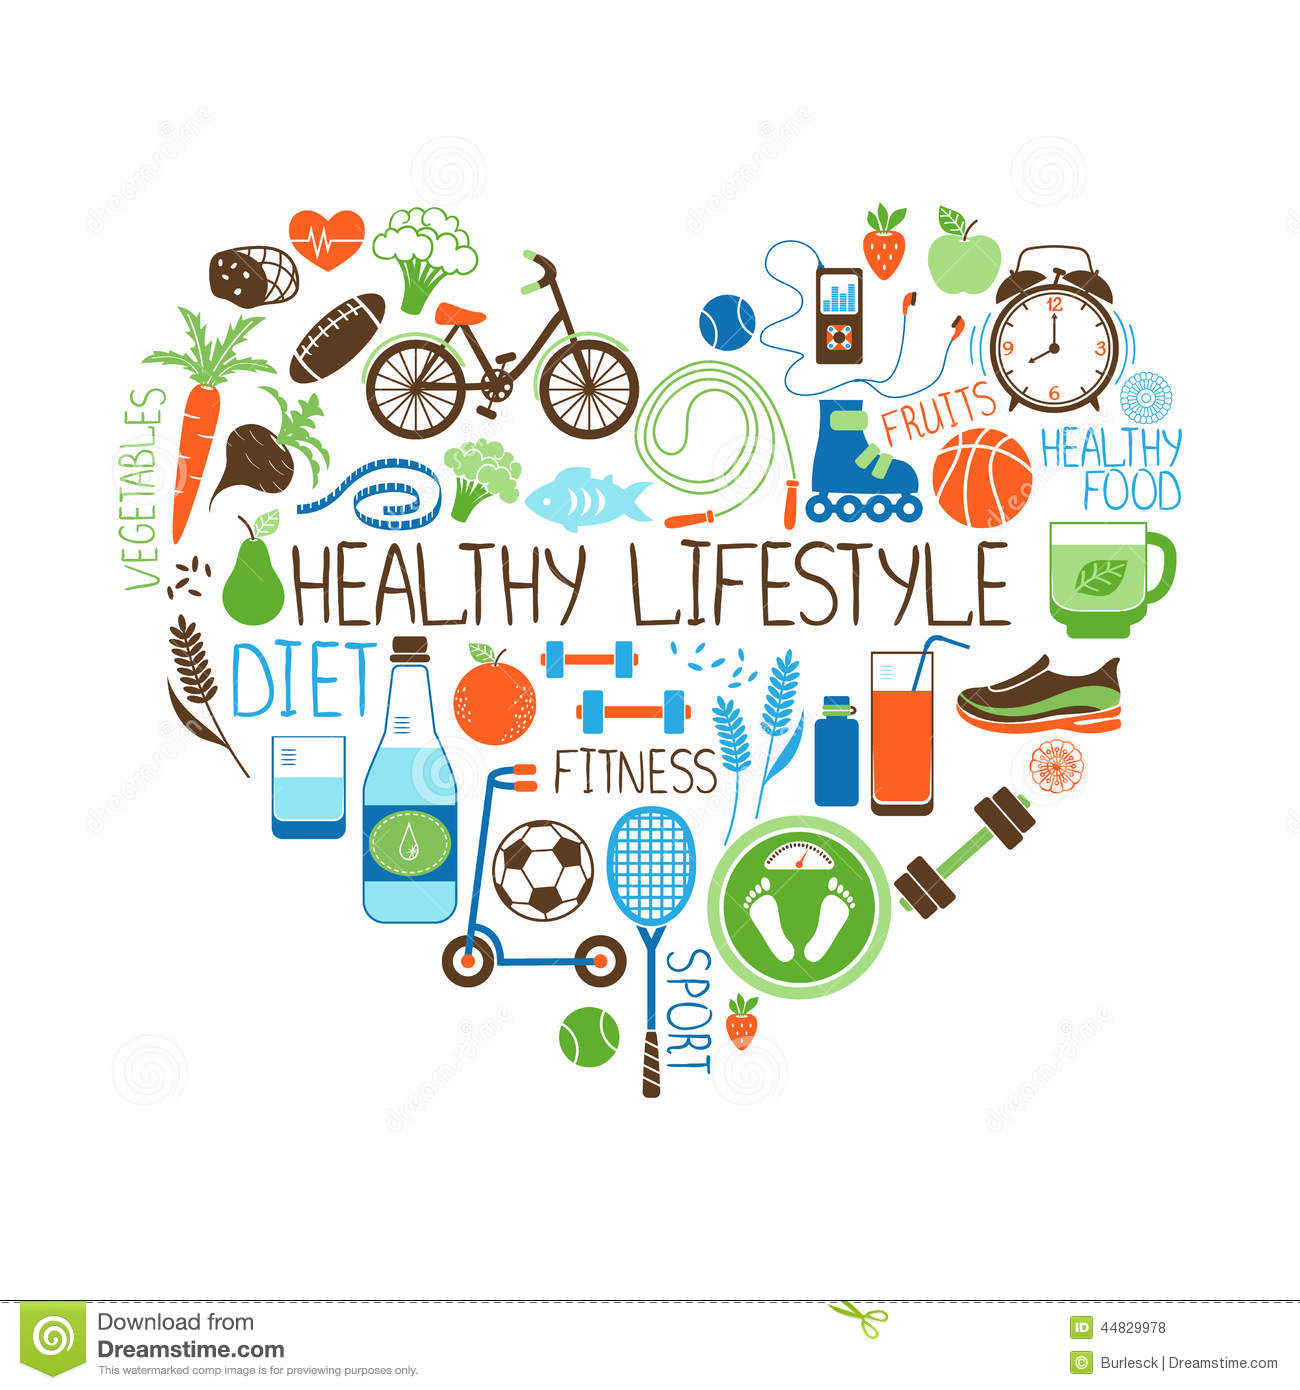 Healthy Lifestyle Diet And Fitness Vector Sign In The Shape Of A Heart